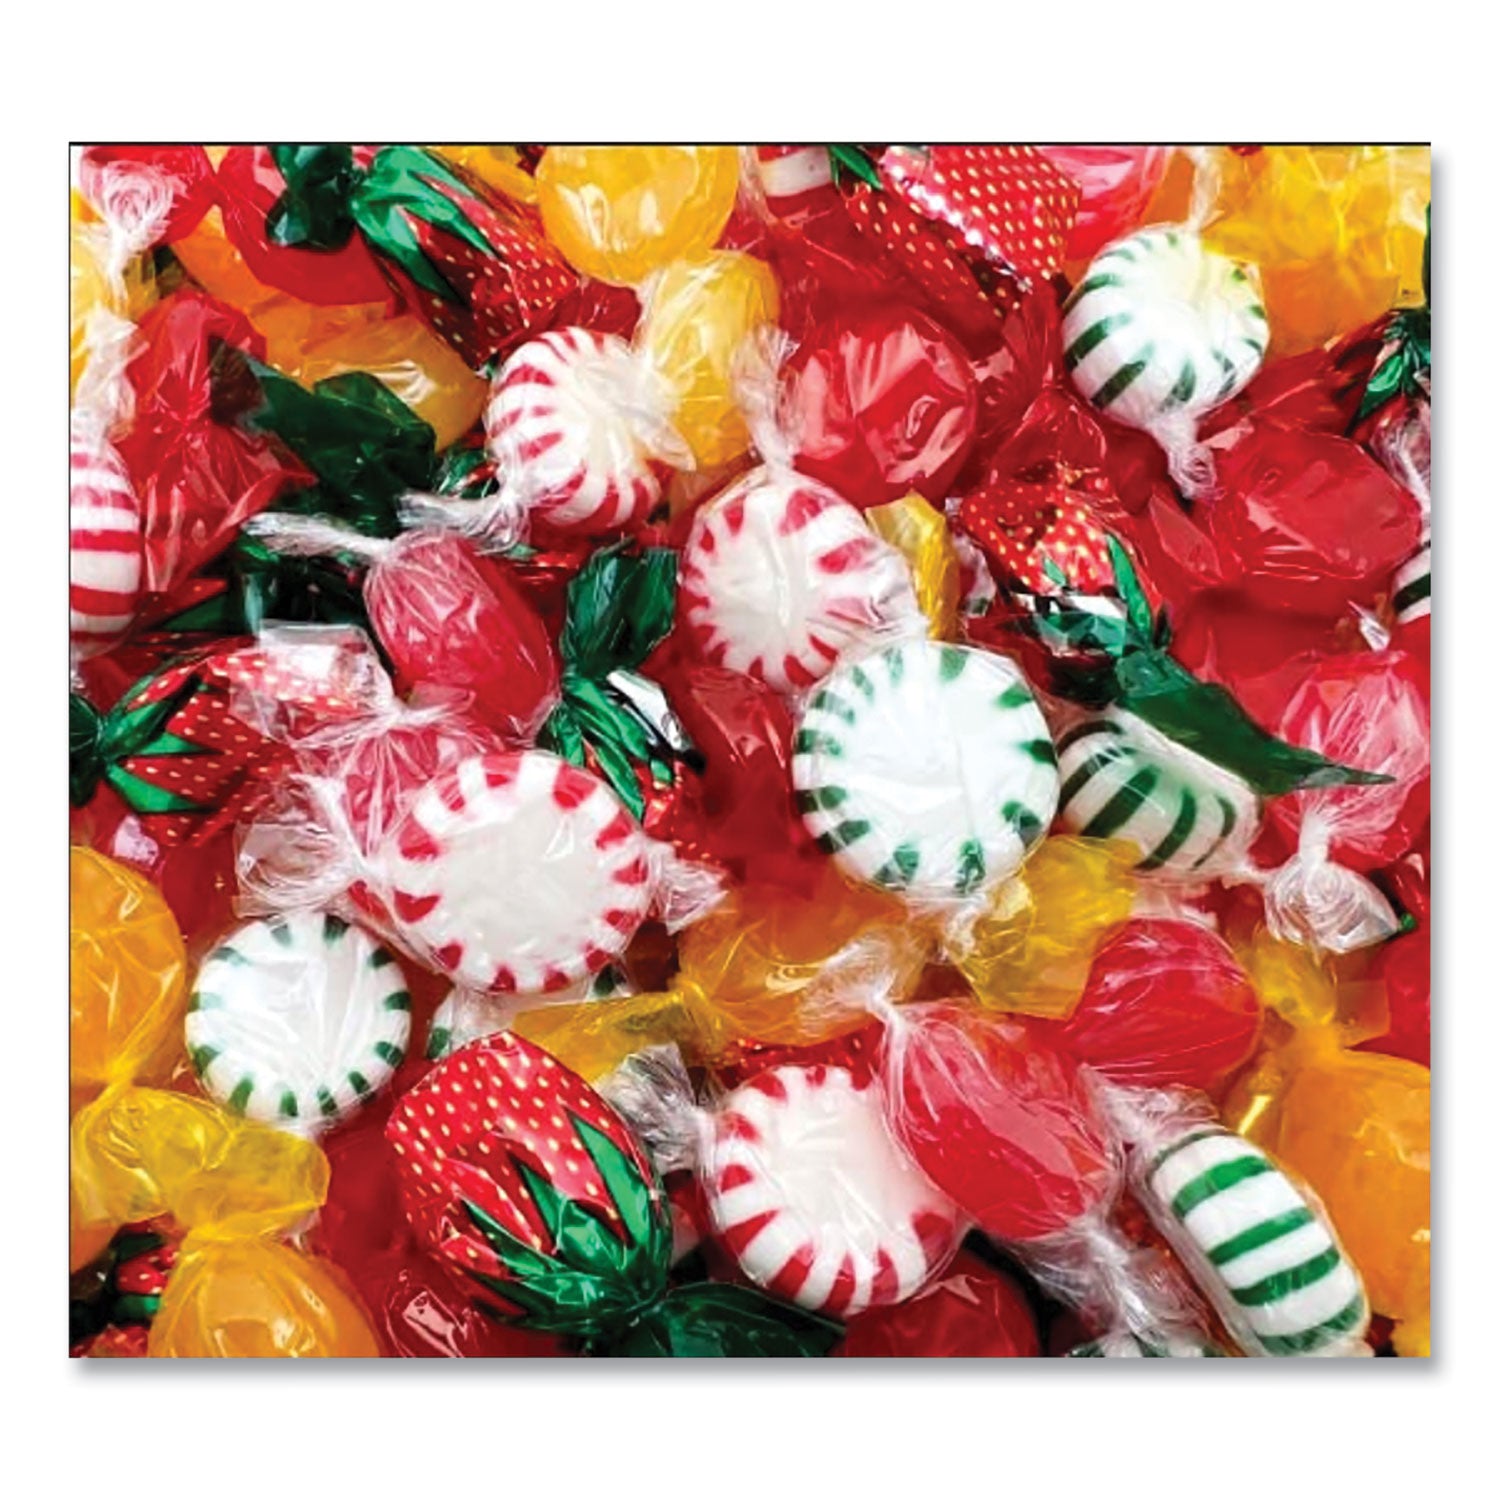 individually-wrapped-candy-assortments-assorted-flavors-5-lb-box_ofx00616 - 4